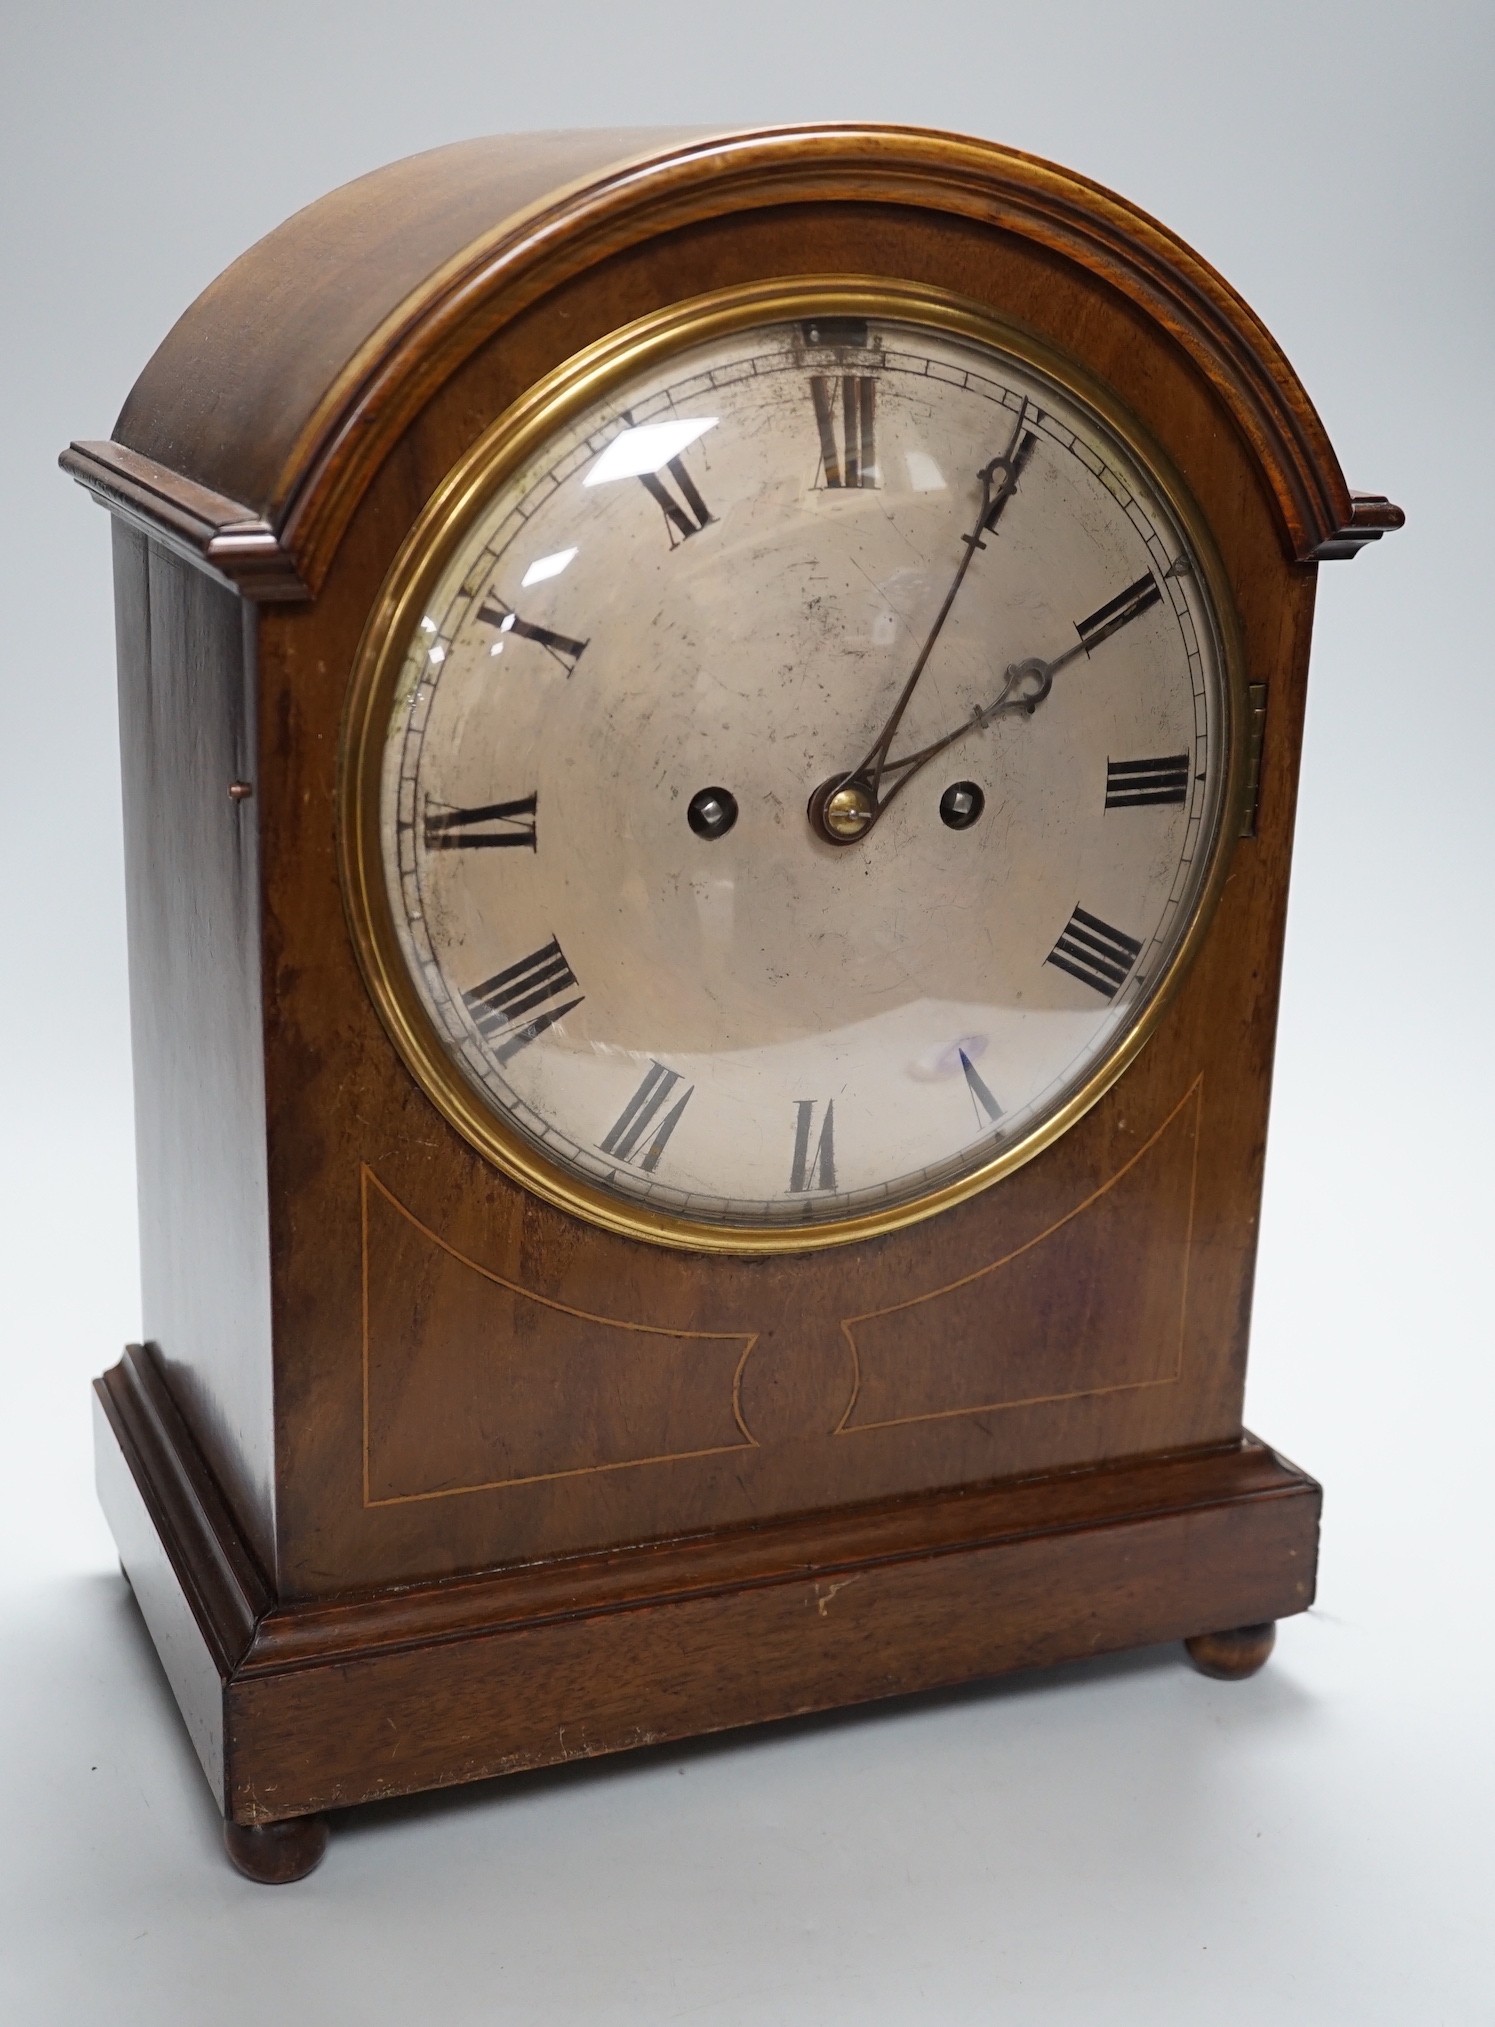 A late 19th/early 20th century mahogany mantel clock with German striking movement and convex